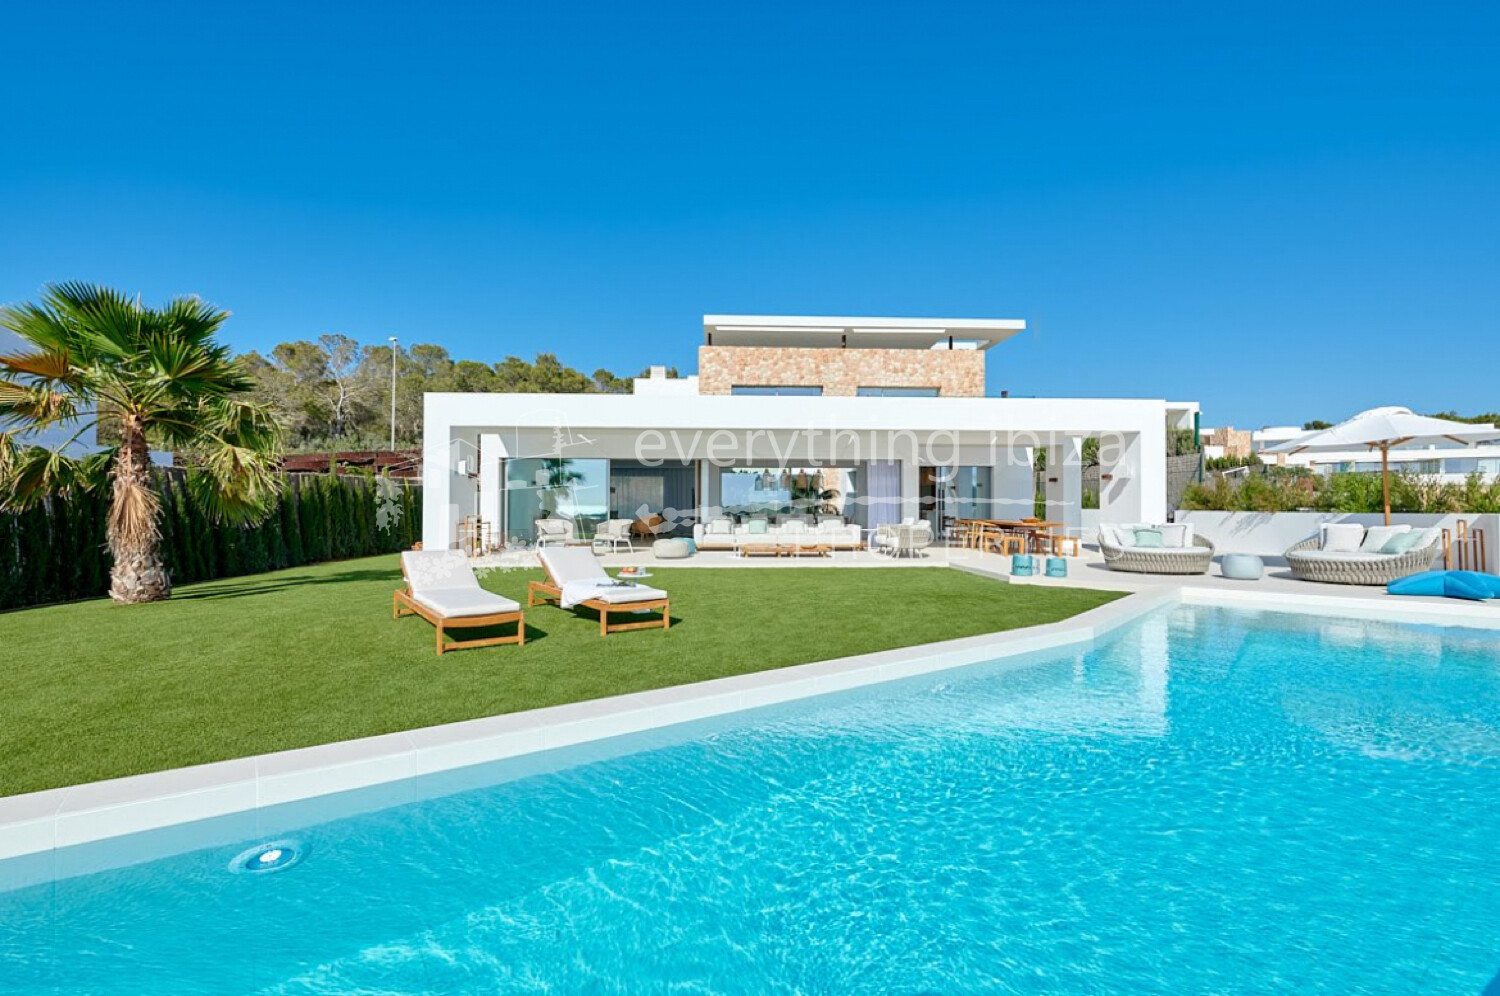 Brand New Luxury Villa Close to the Beach with Fantastic Views, ref. 1541, for sale in Ibiza by everything ibiza Properties